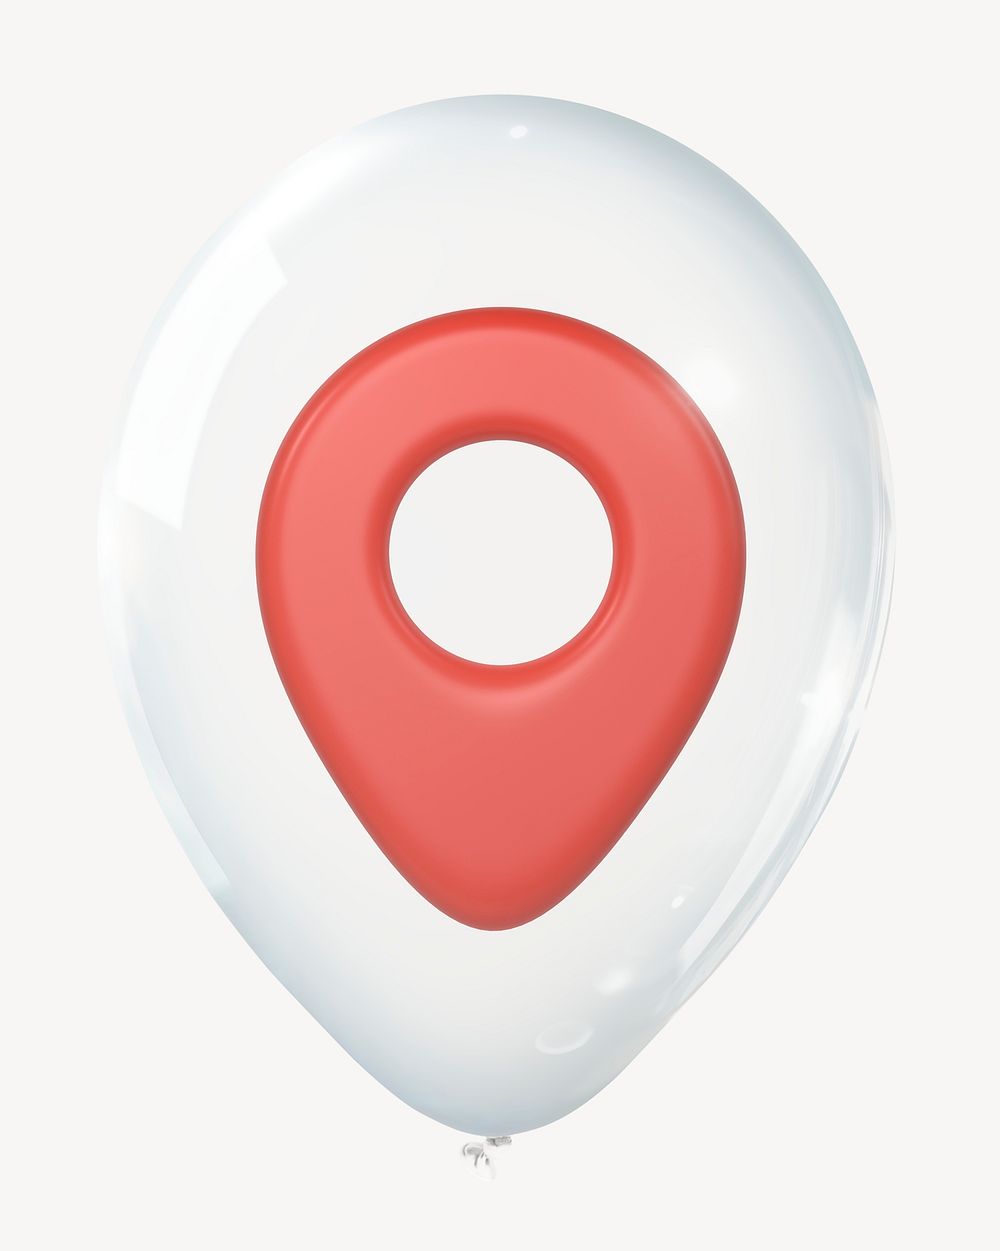 Location pin 3D balloon collage element psd